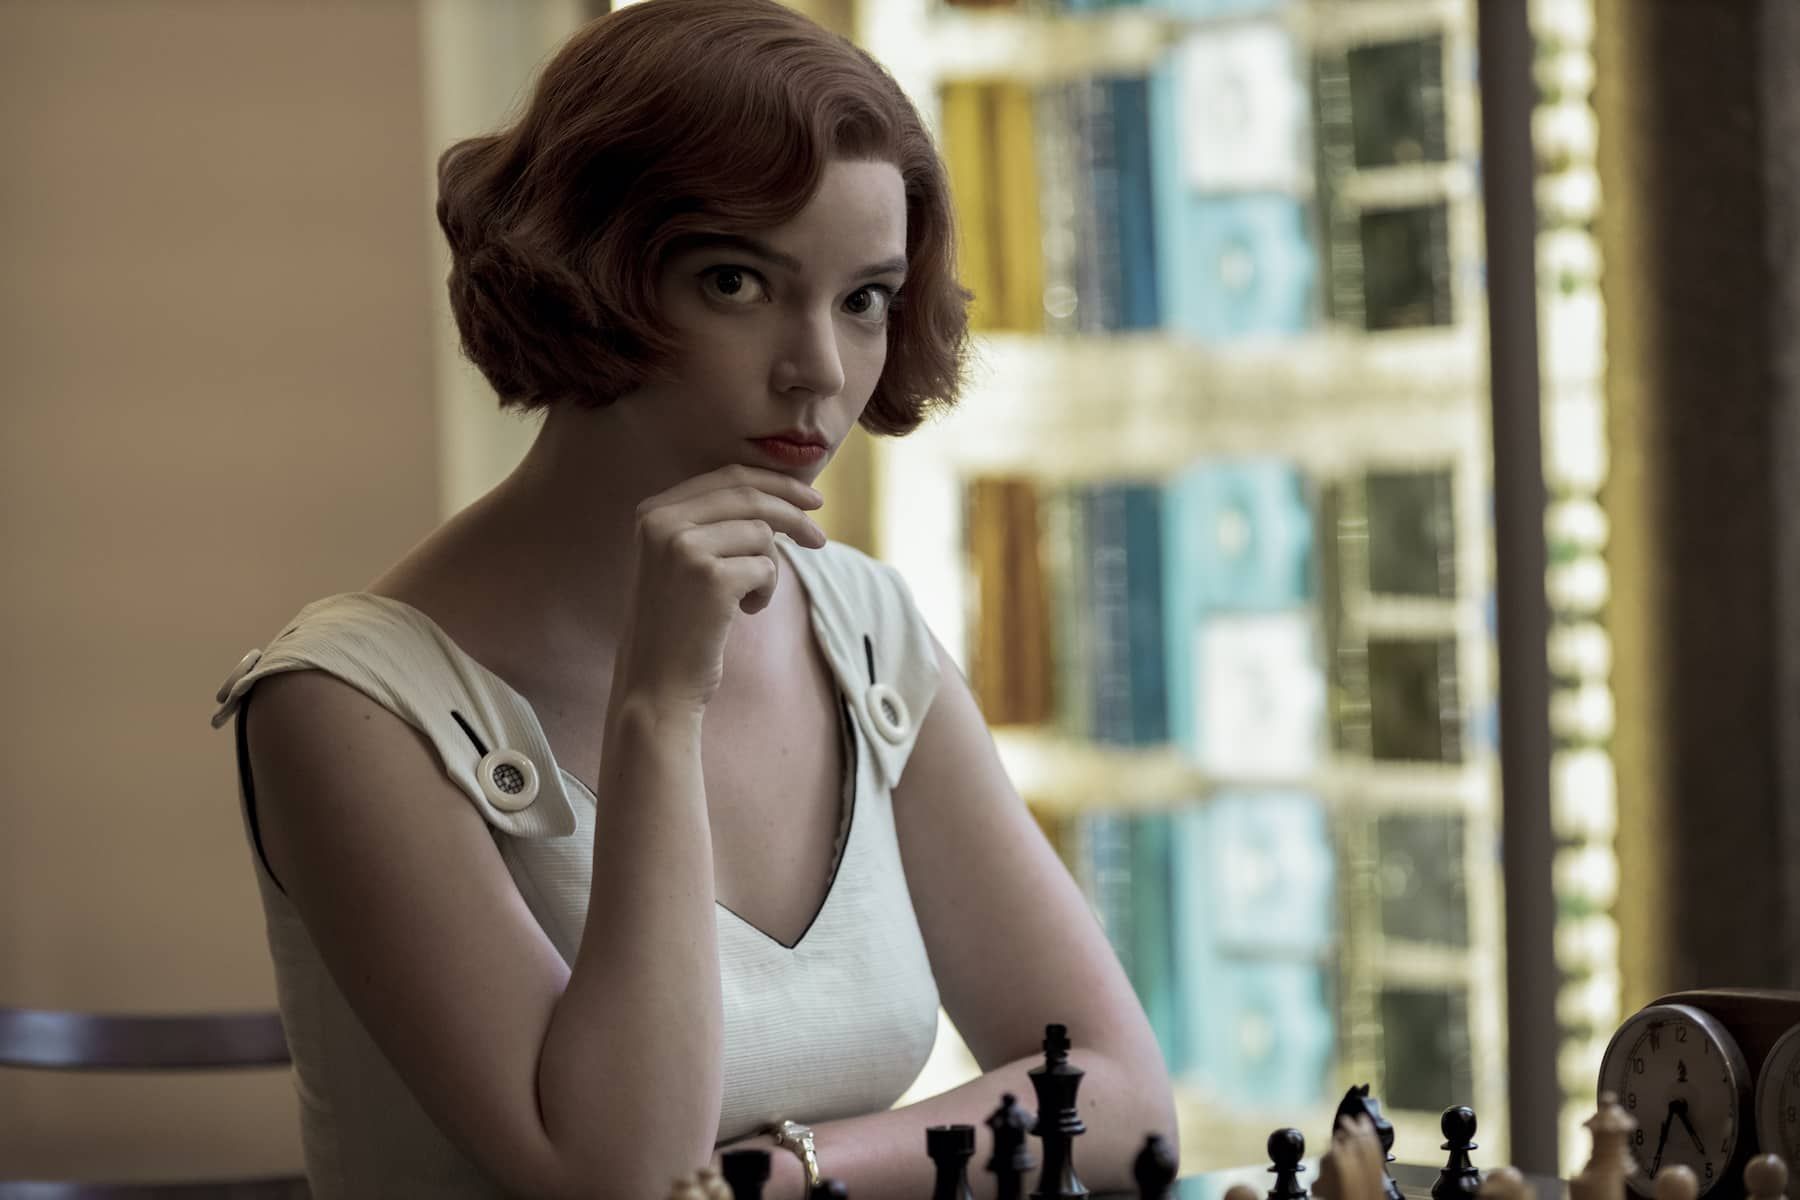 Fashion-forward chess queen Beth Harmon (played by Anya Taylor-Joy) in The Queen's Gambit